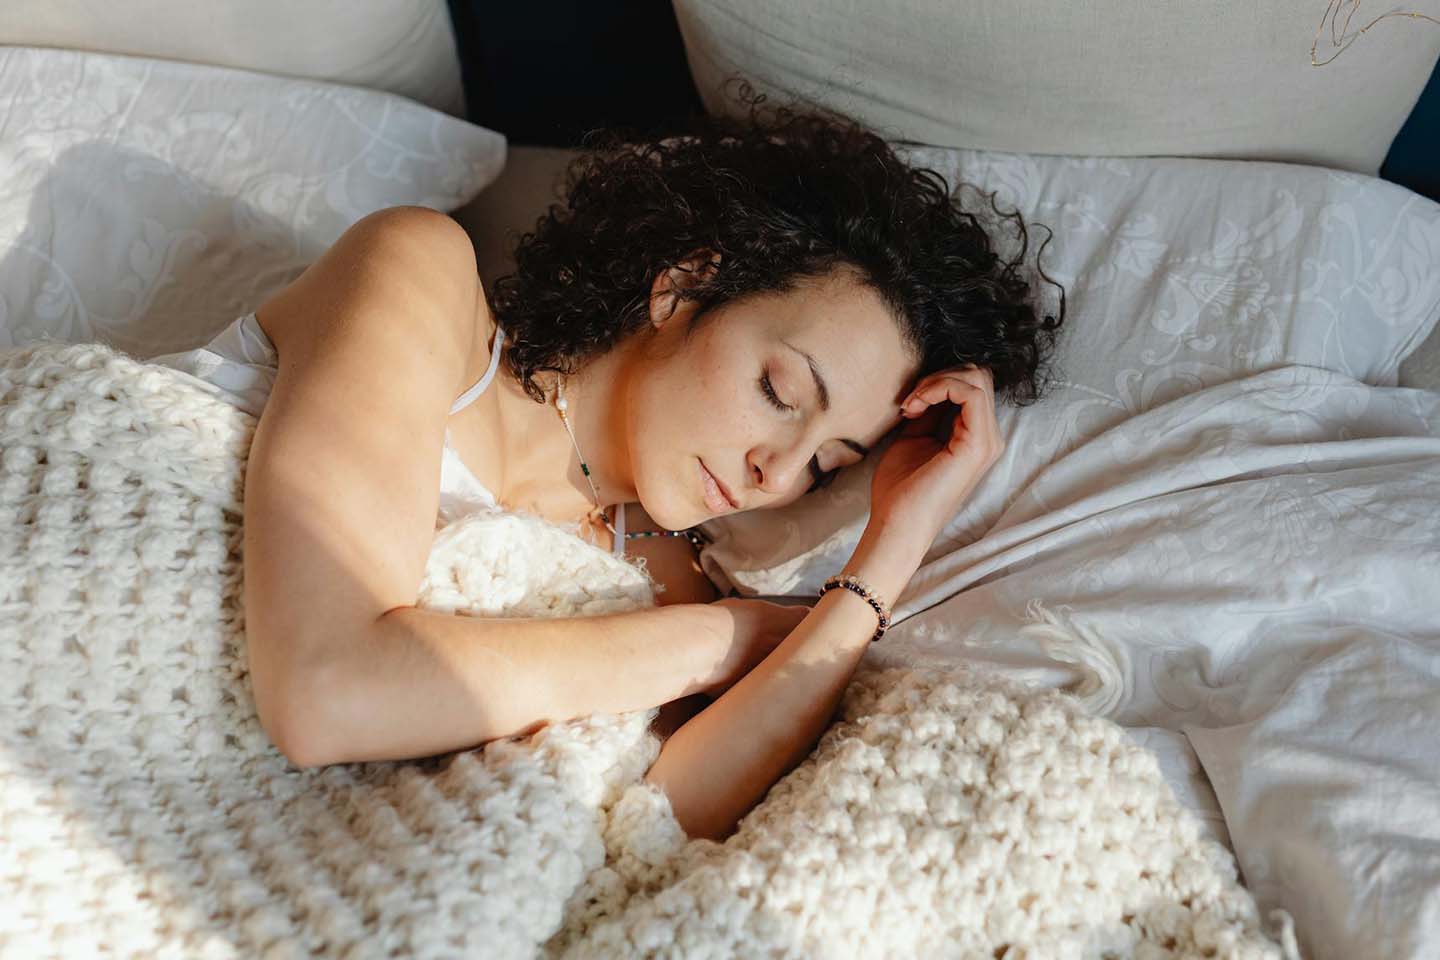 a woman peacefully sleeping on bed underneath knitted white blanket